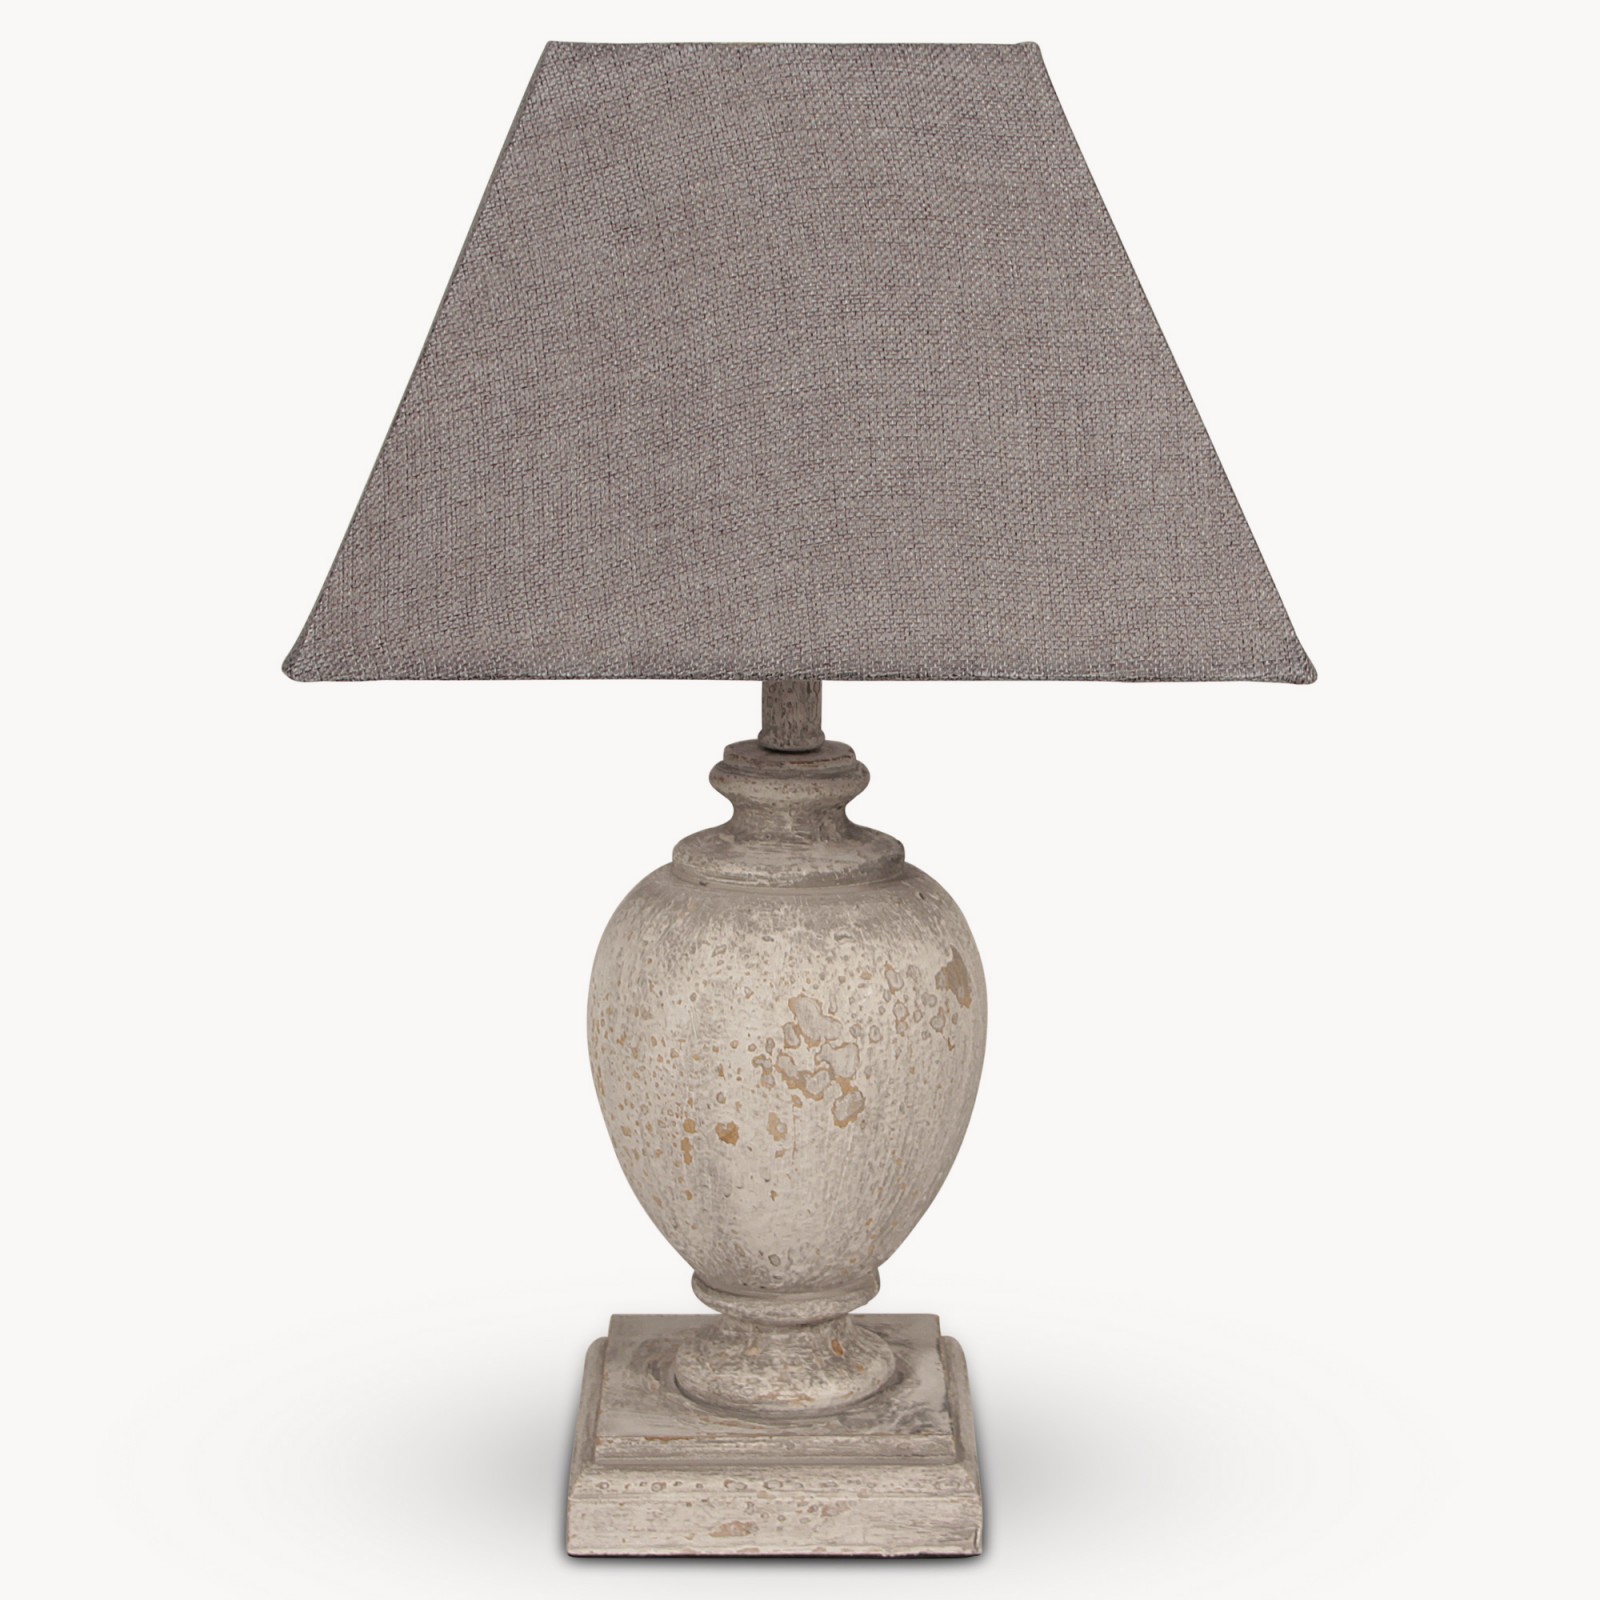 Mowbray Light Grey Square Table Lamp with Square Grey Shade | One World